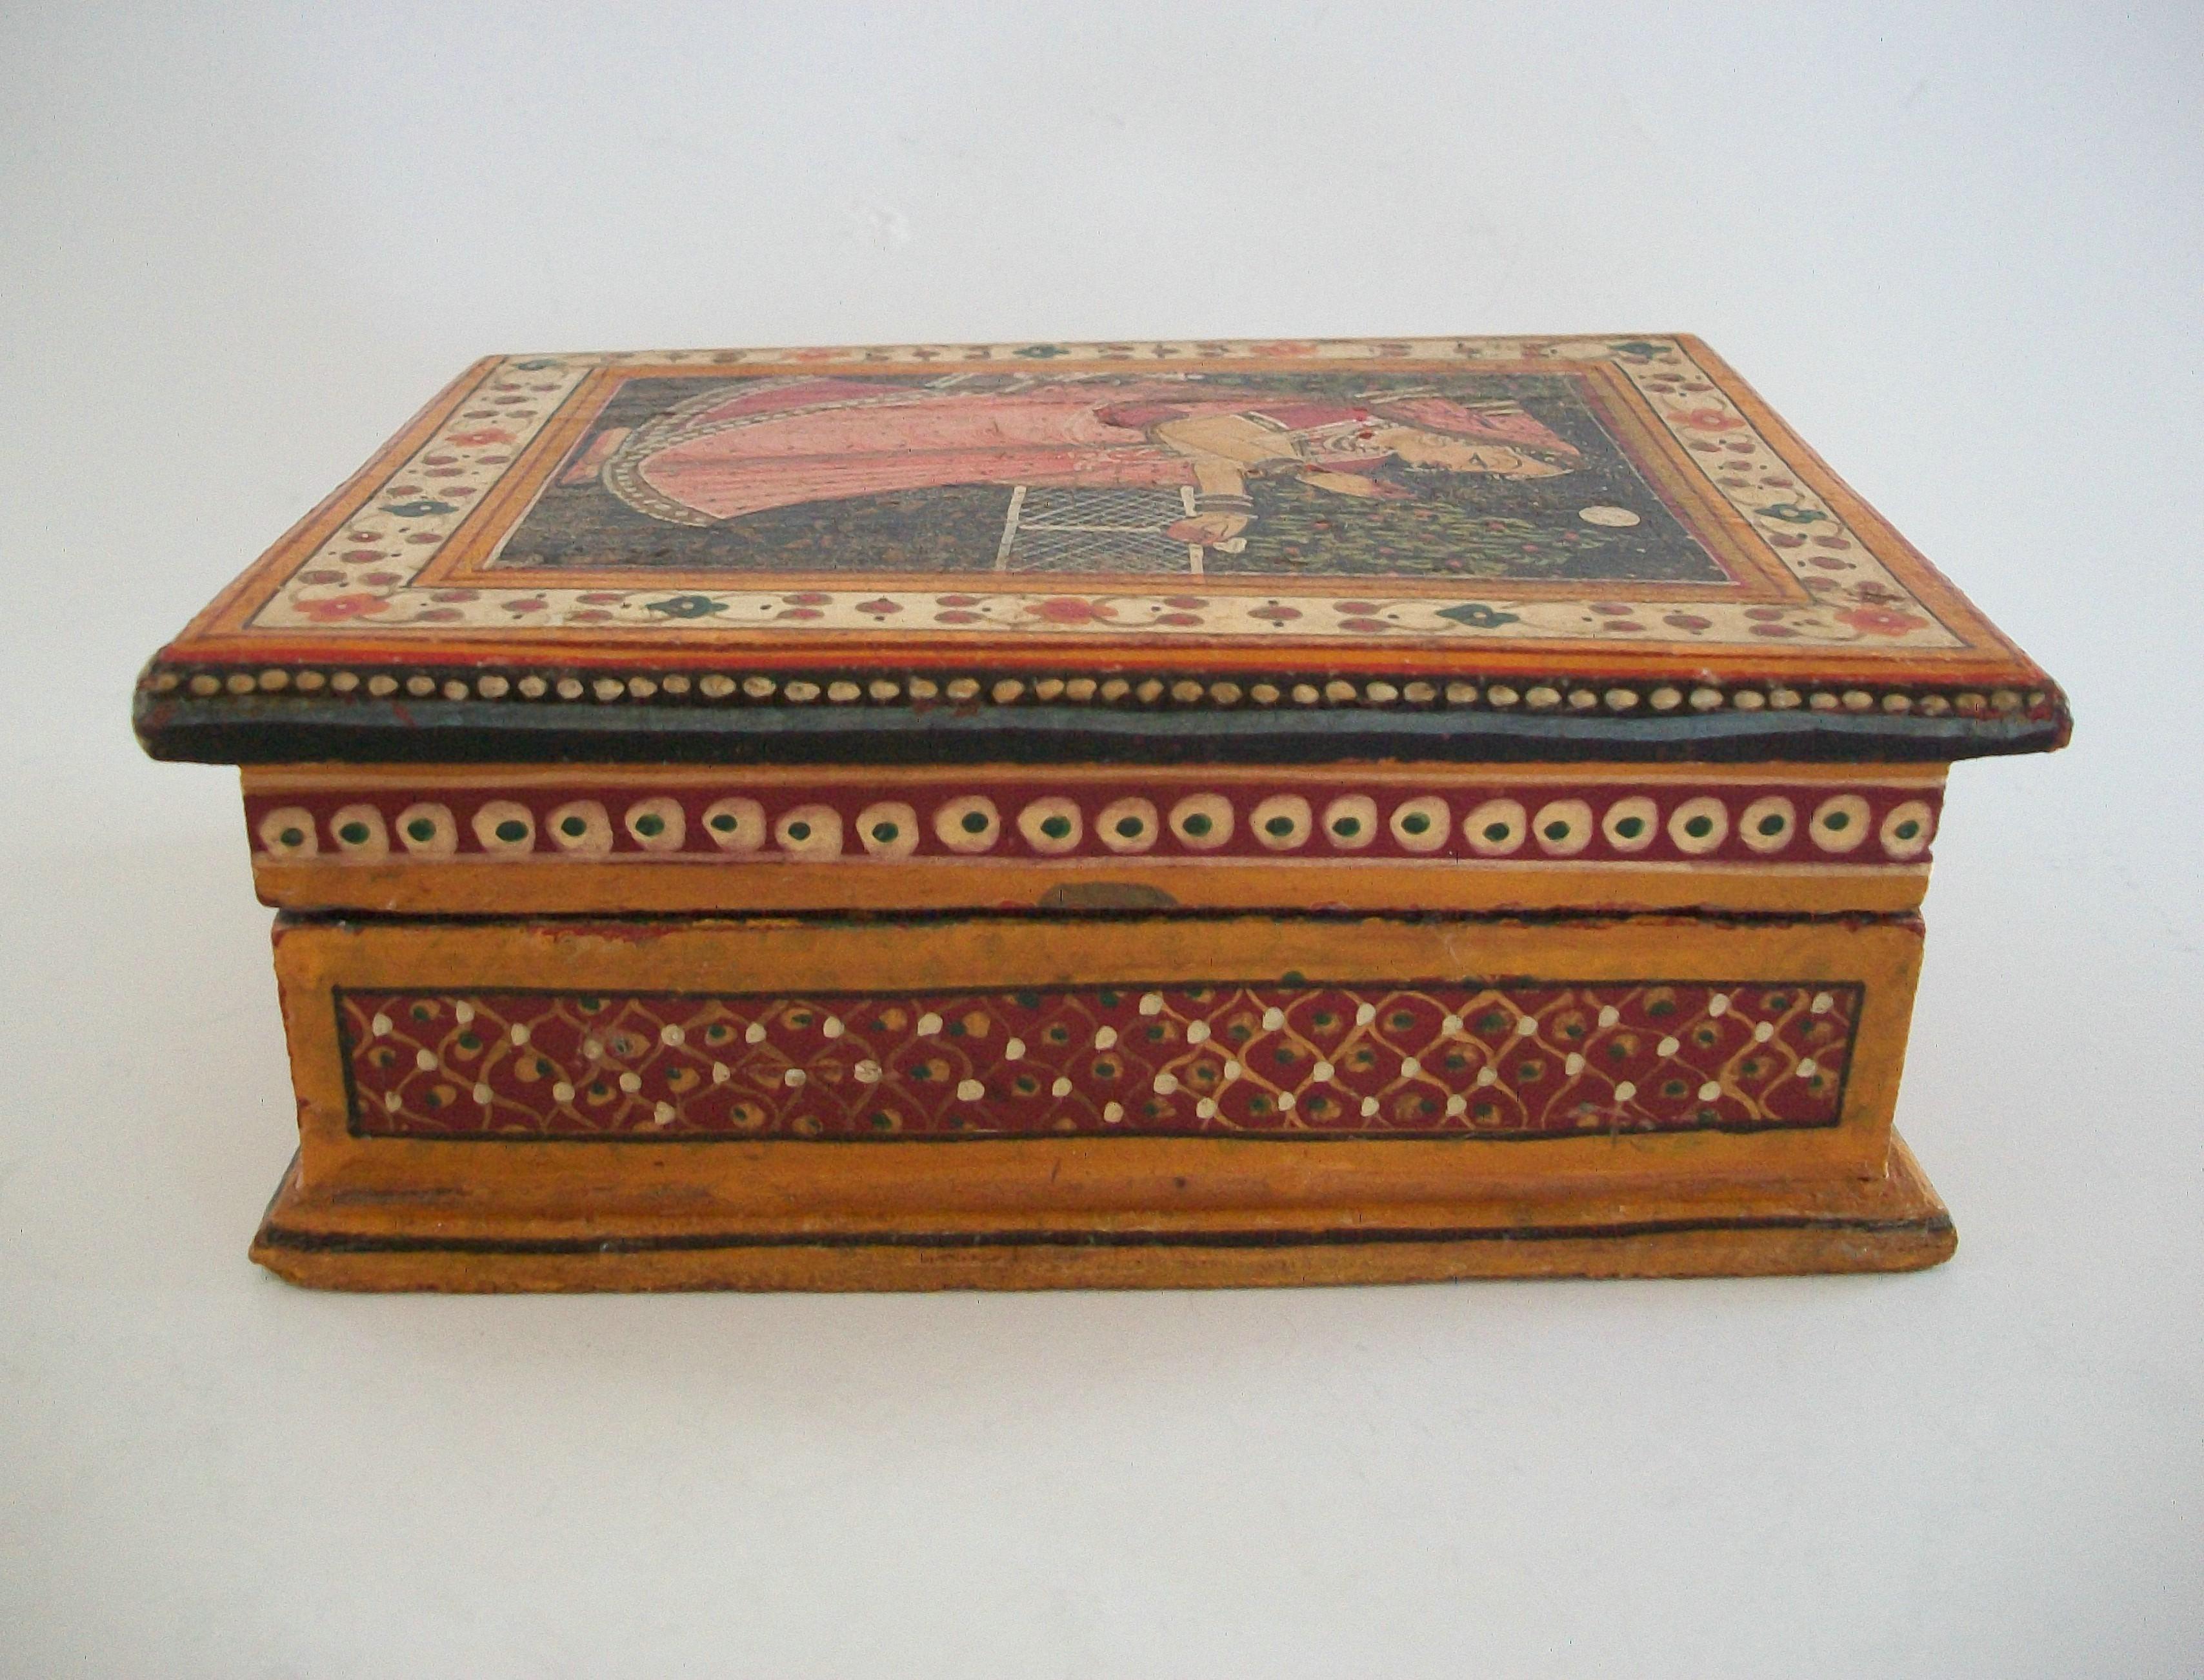 Vintage South Asian Folk Art Hand Painted Wooden Box - India - Mid 20th Century For Sale 2